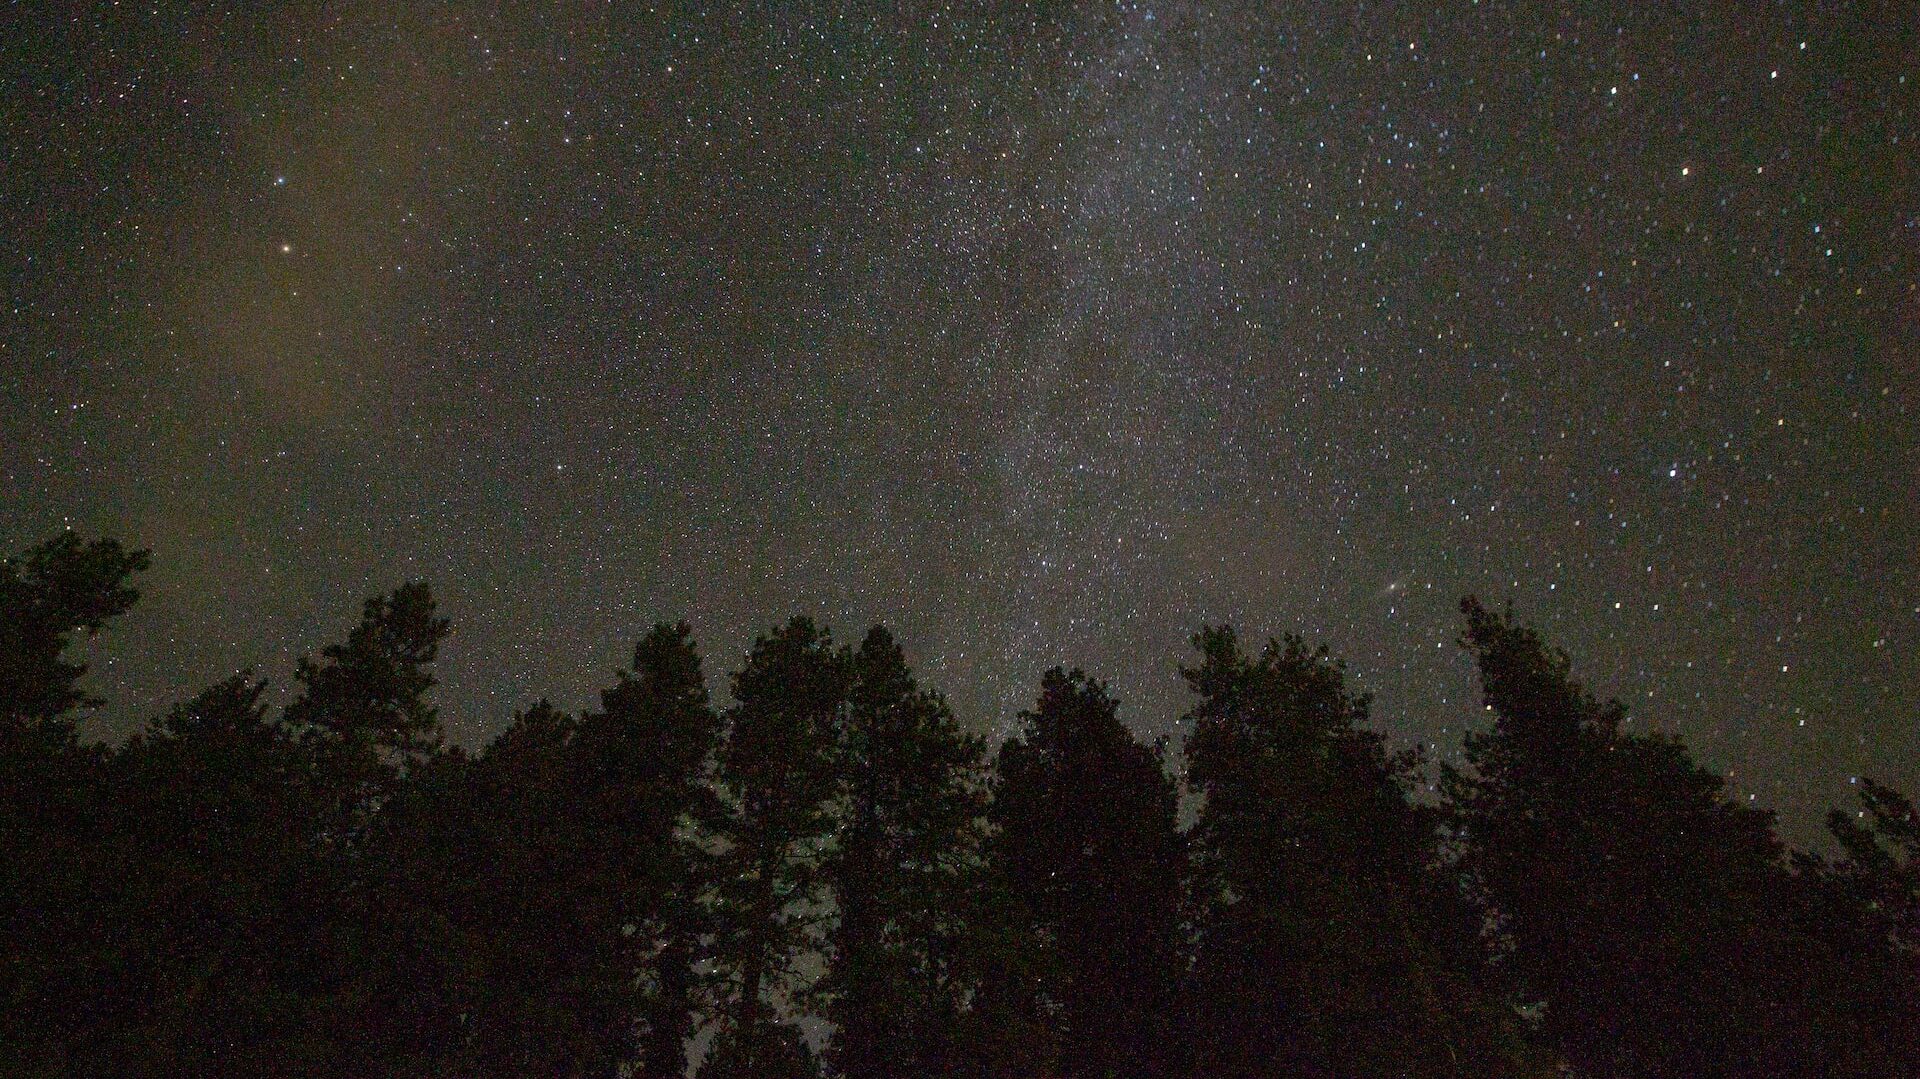 Night sky with stars and outline of trees